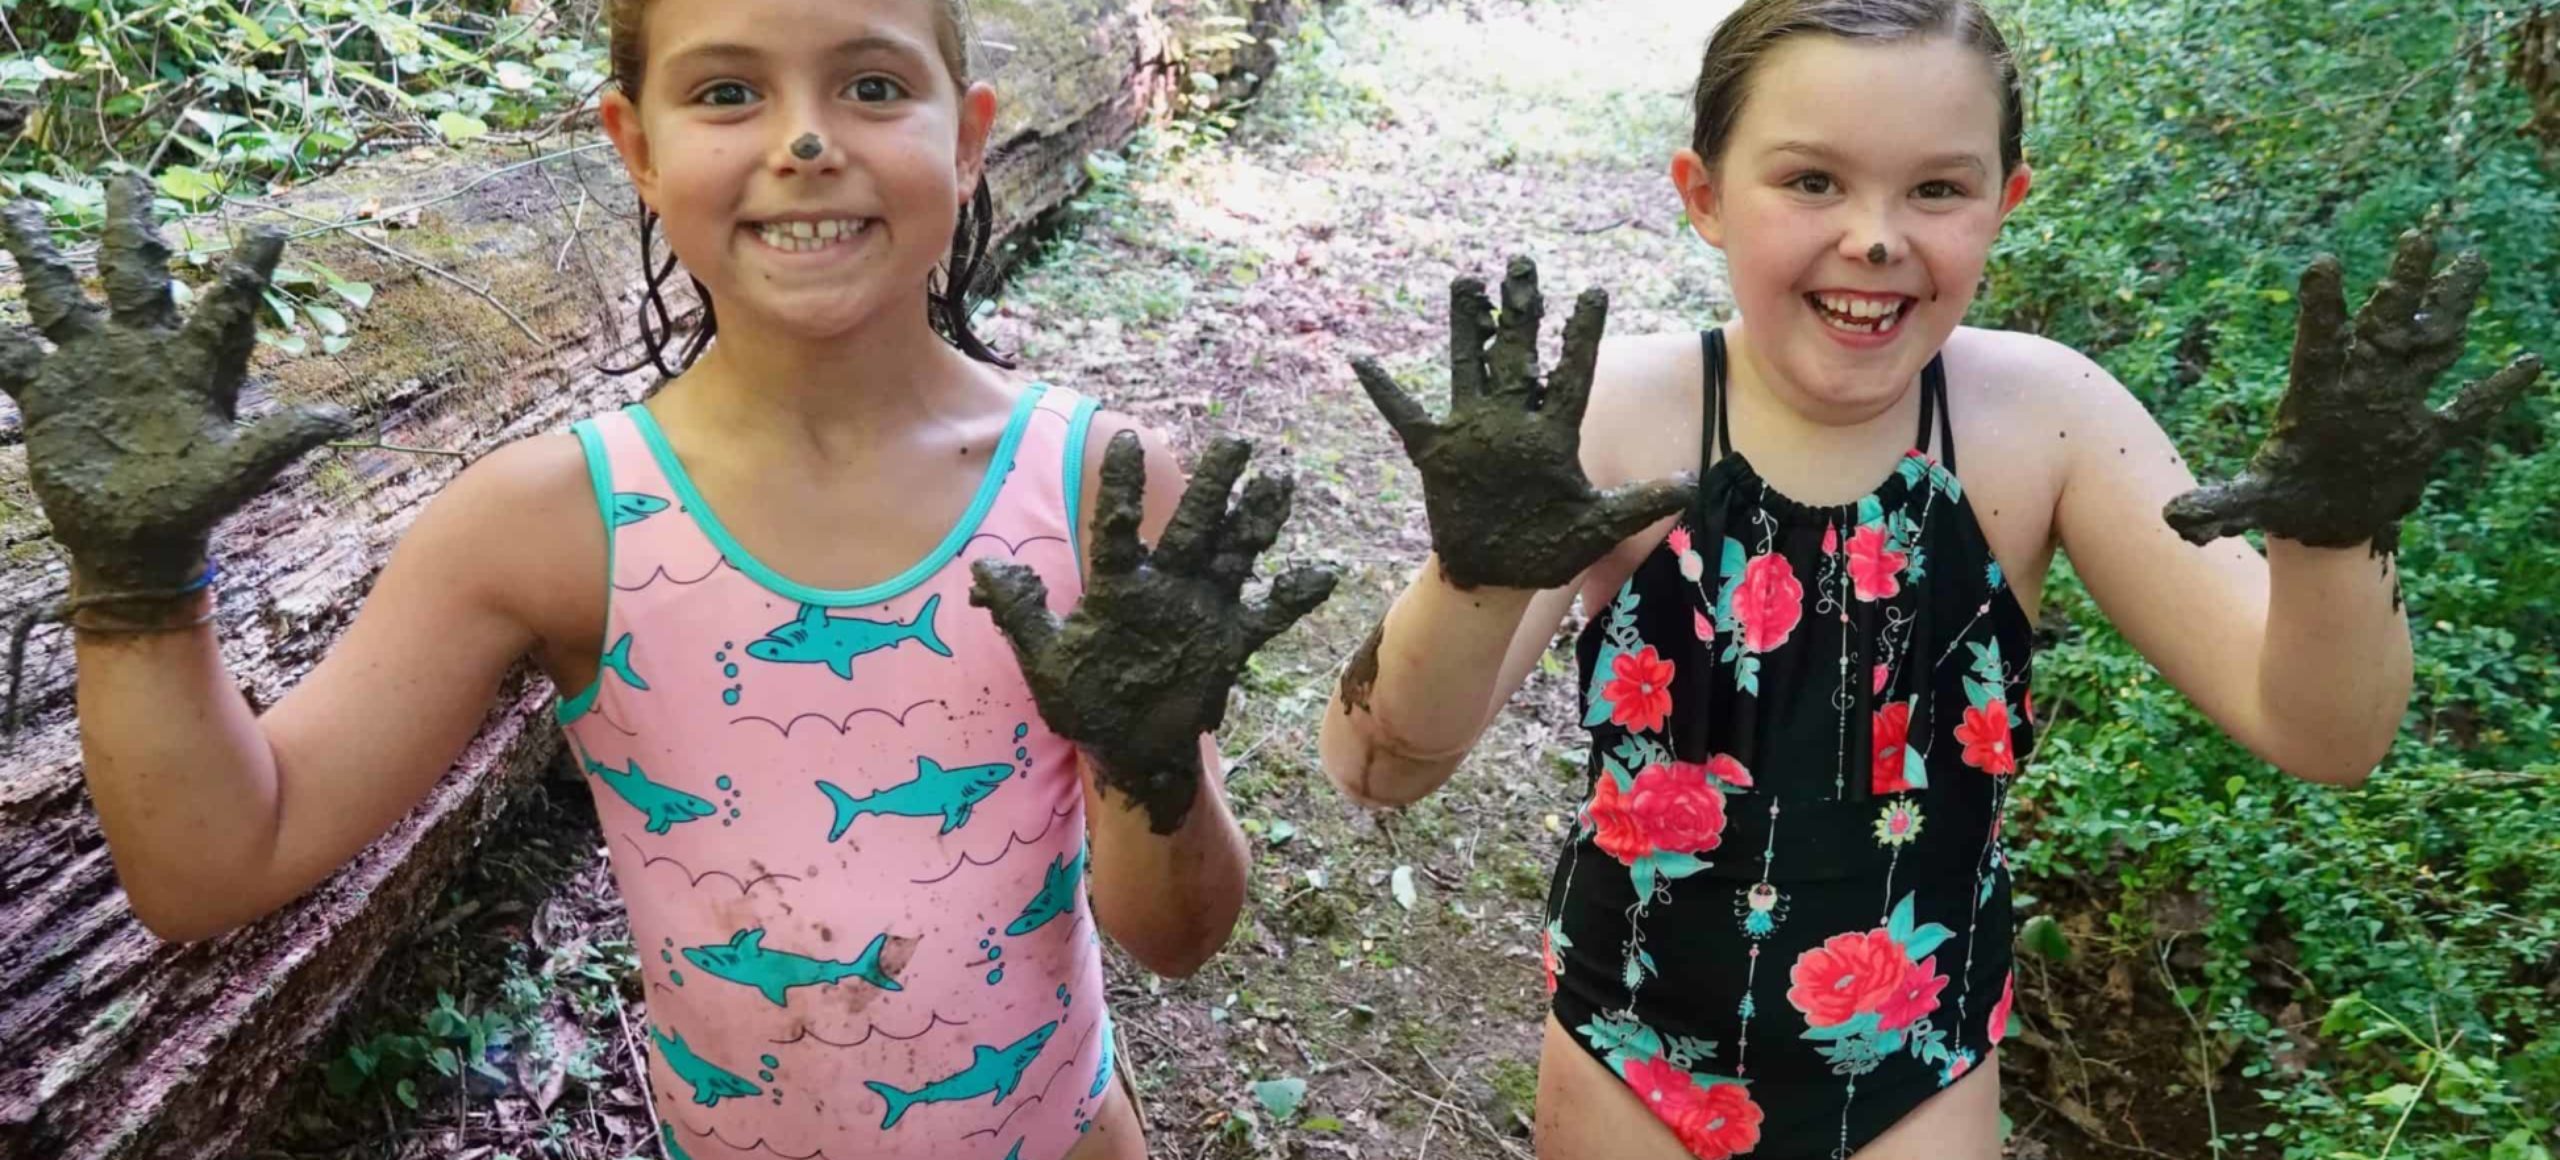 Two girls wearing bathing suits face the camera. They're holding up muddy hands and have dollops of mud on their noses. Big smiles.